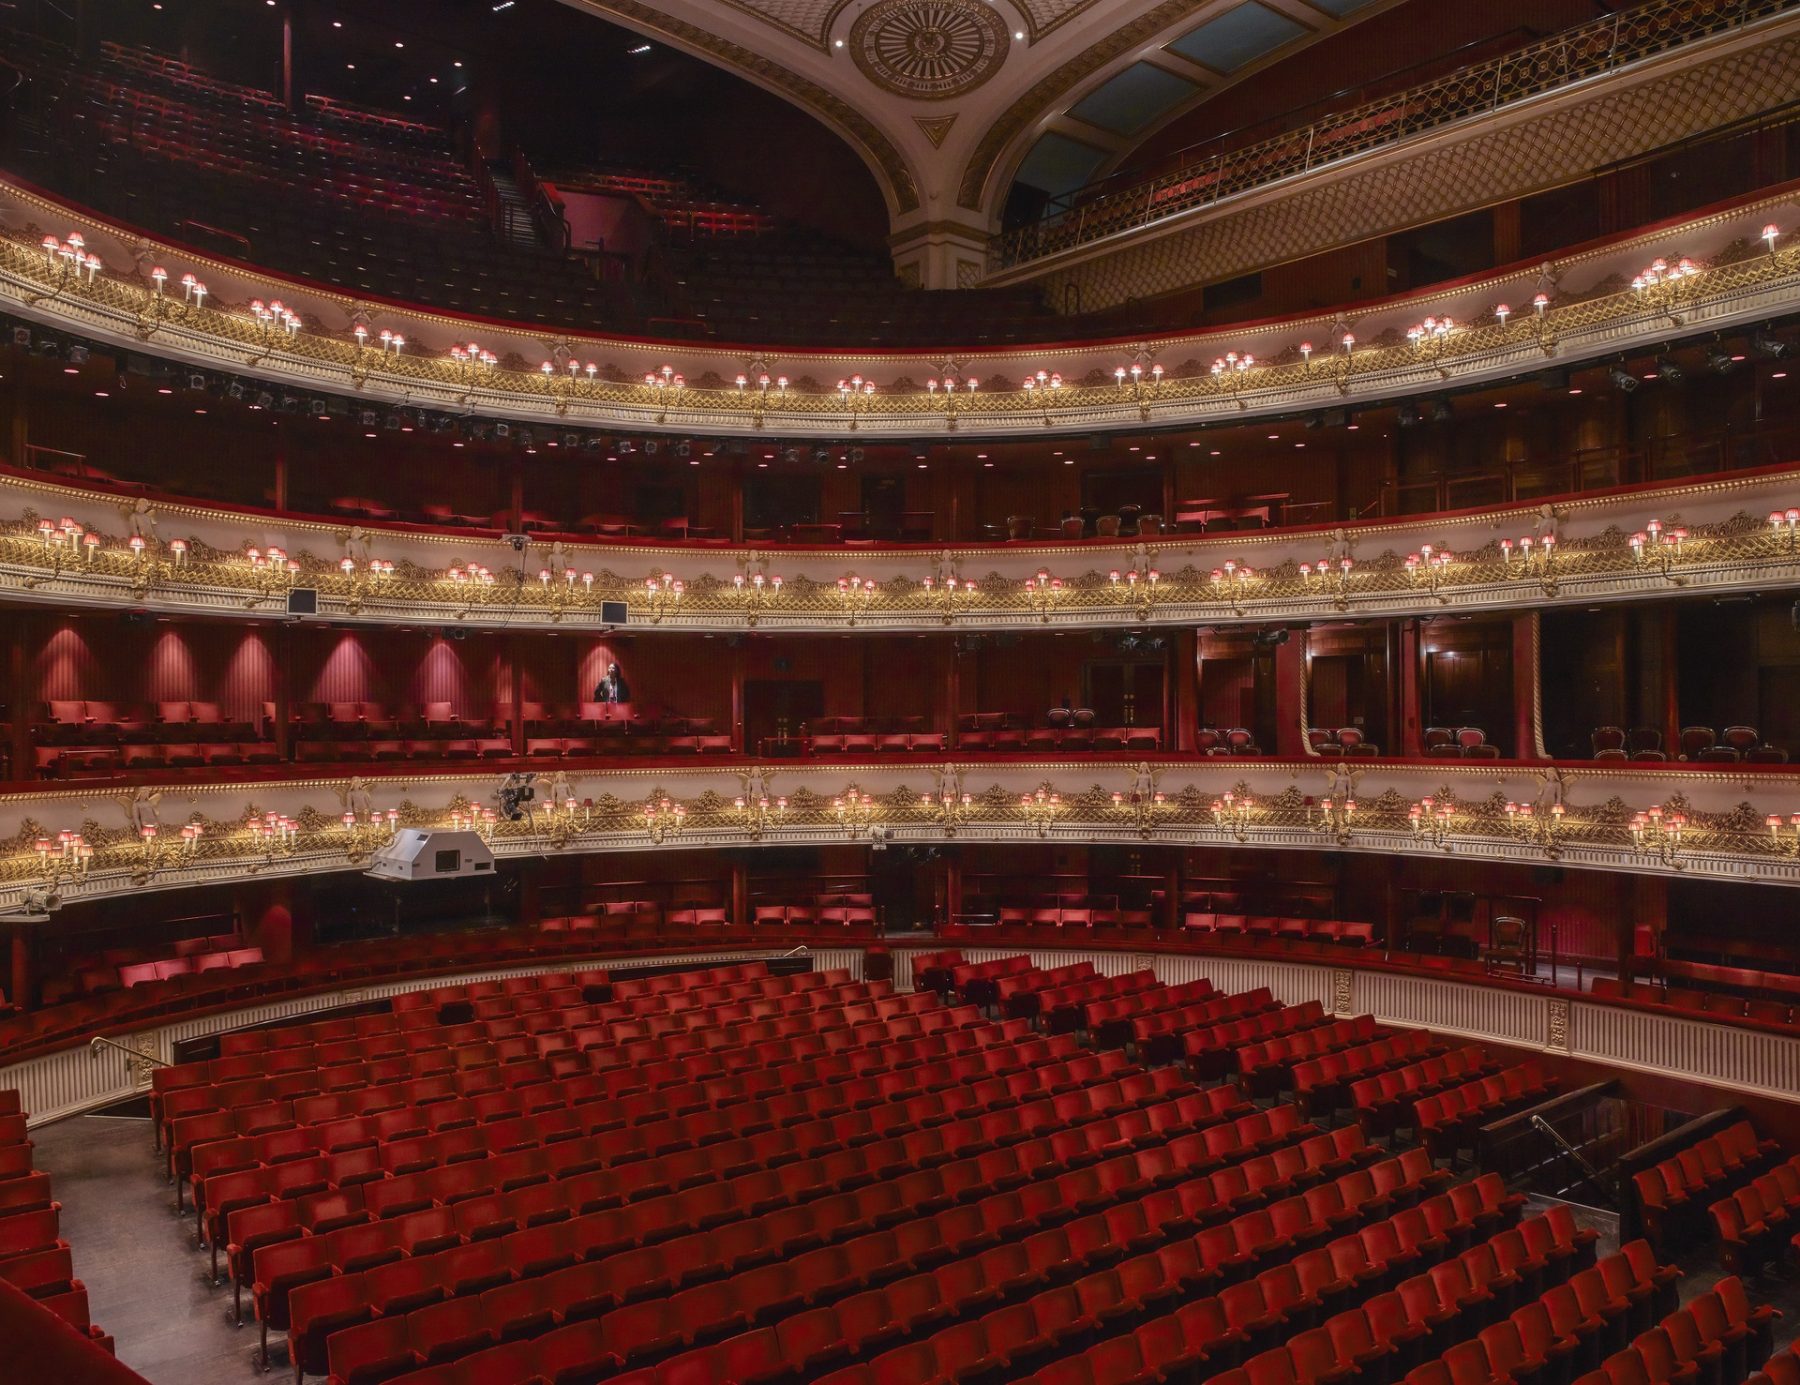 The Royal Opera House Messums London